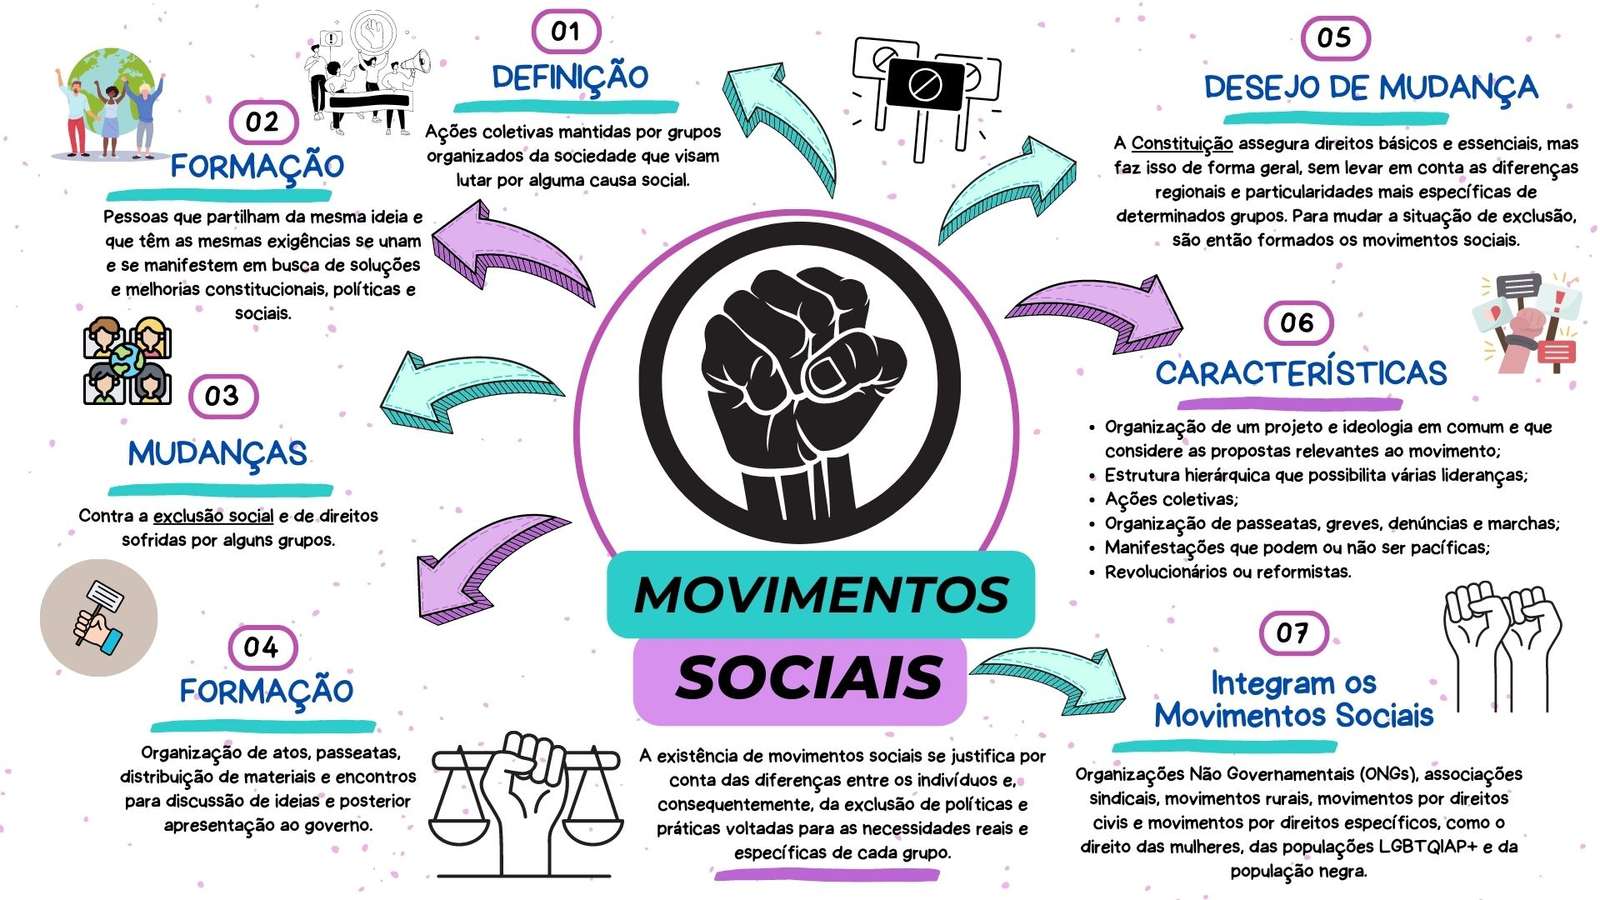 SOCIAL MOVEMENTS jigsaw puzzle online